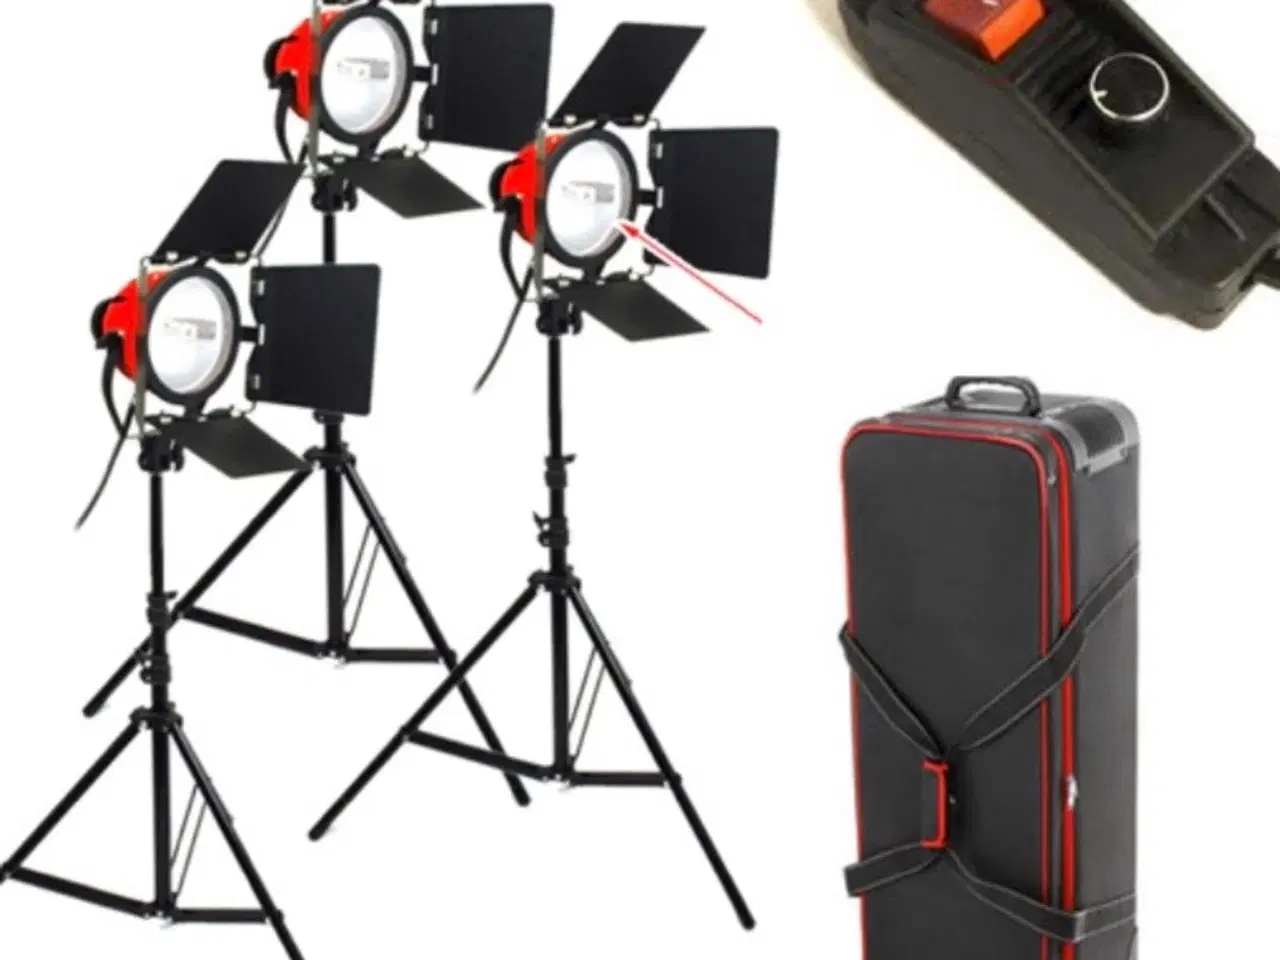 Billede 1 - 3 REDHEAD STUDIO lights with dimmer switches